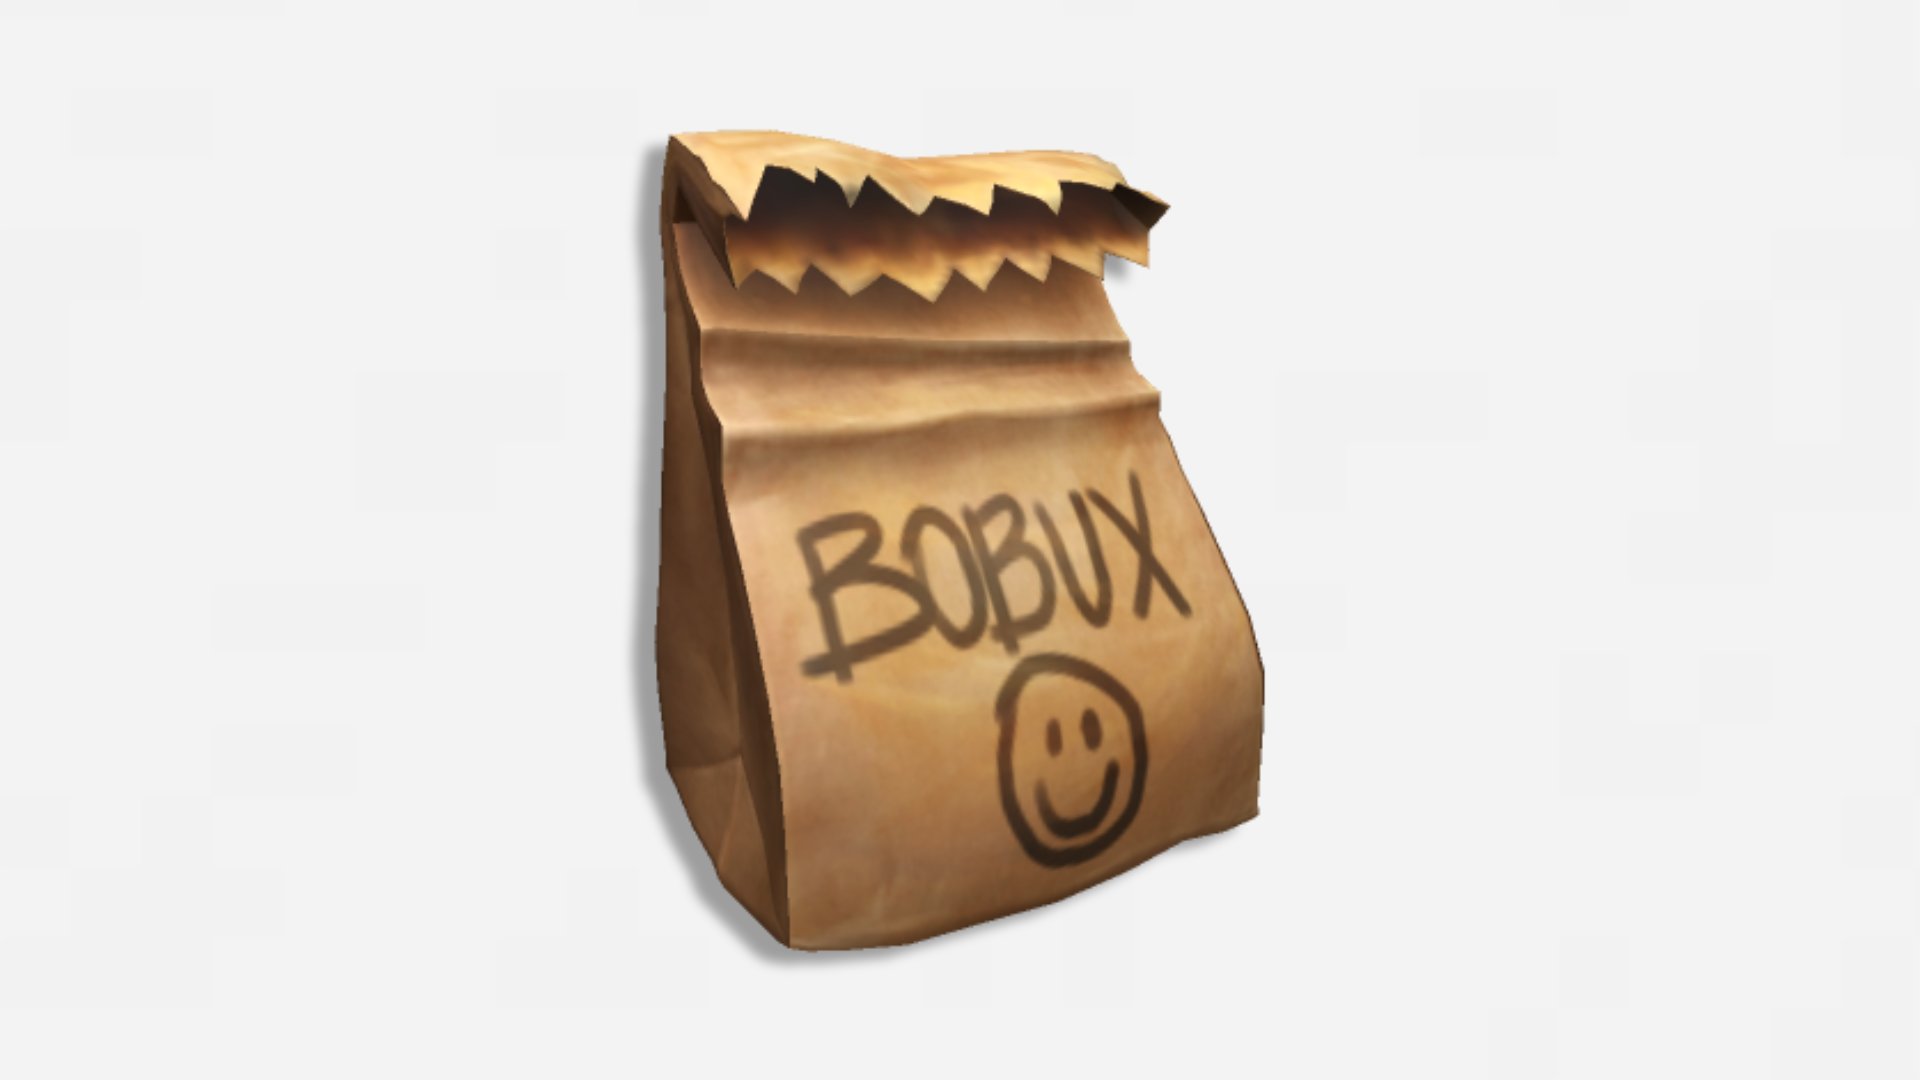 Let's get the Bobux! - Roblox